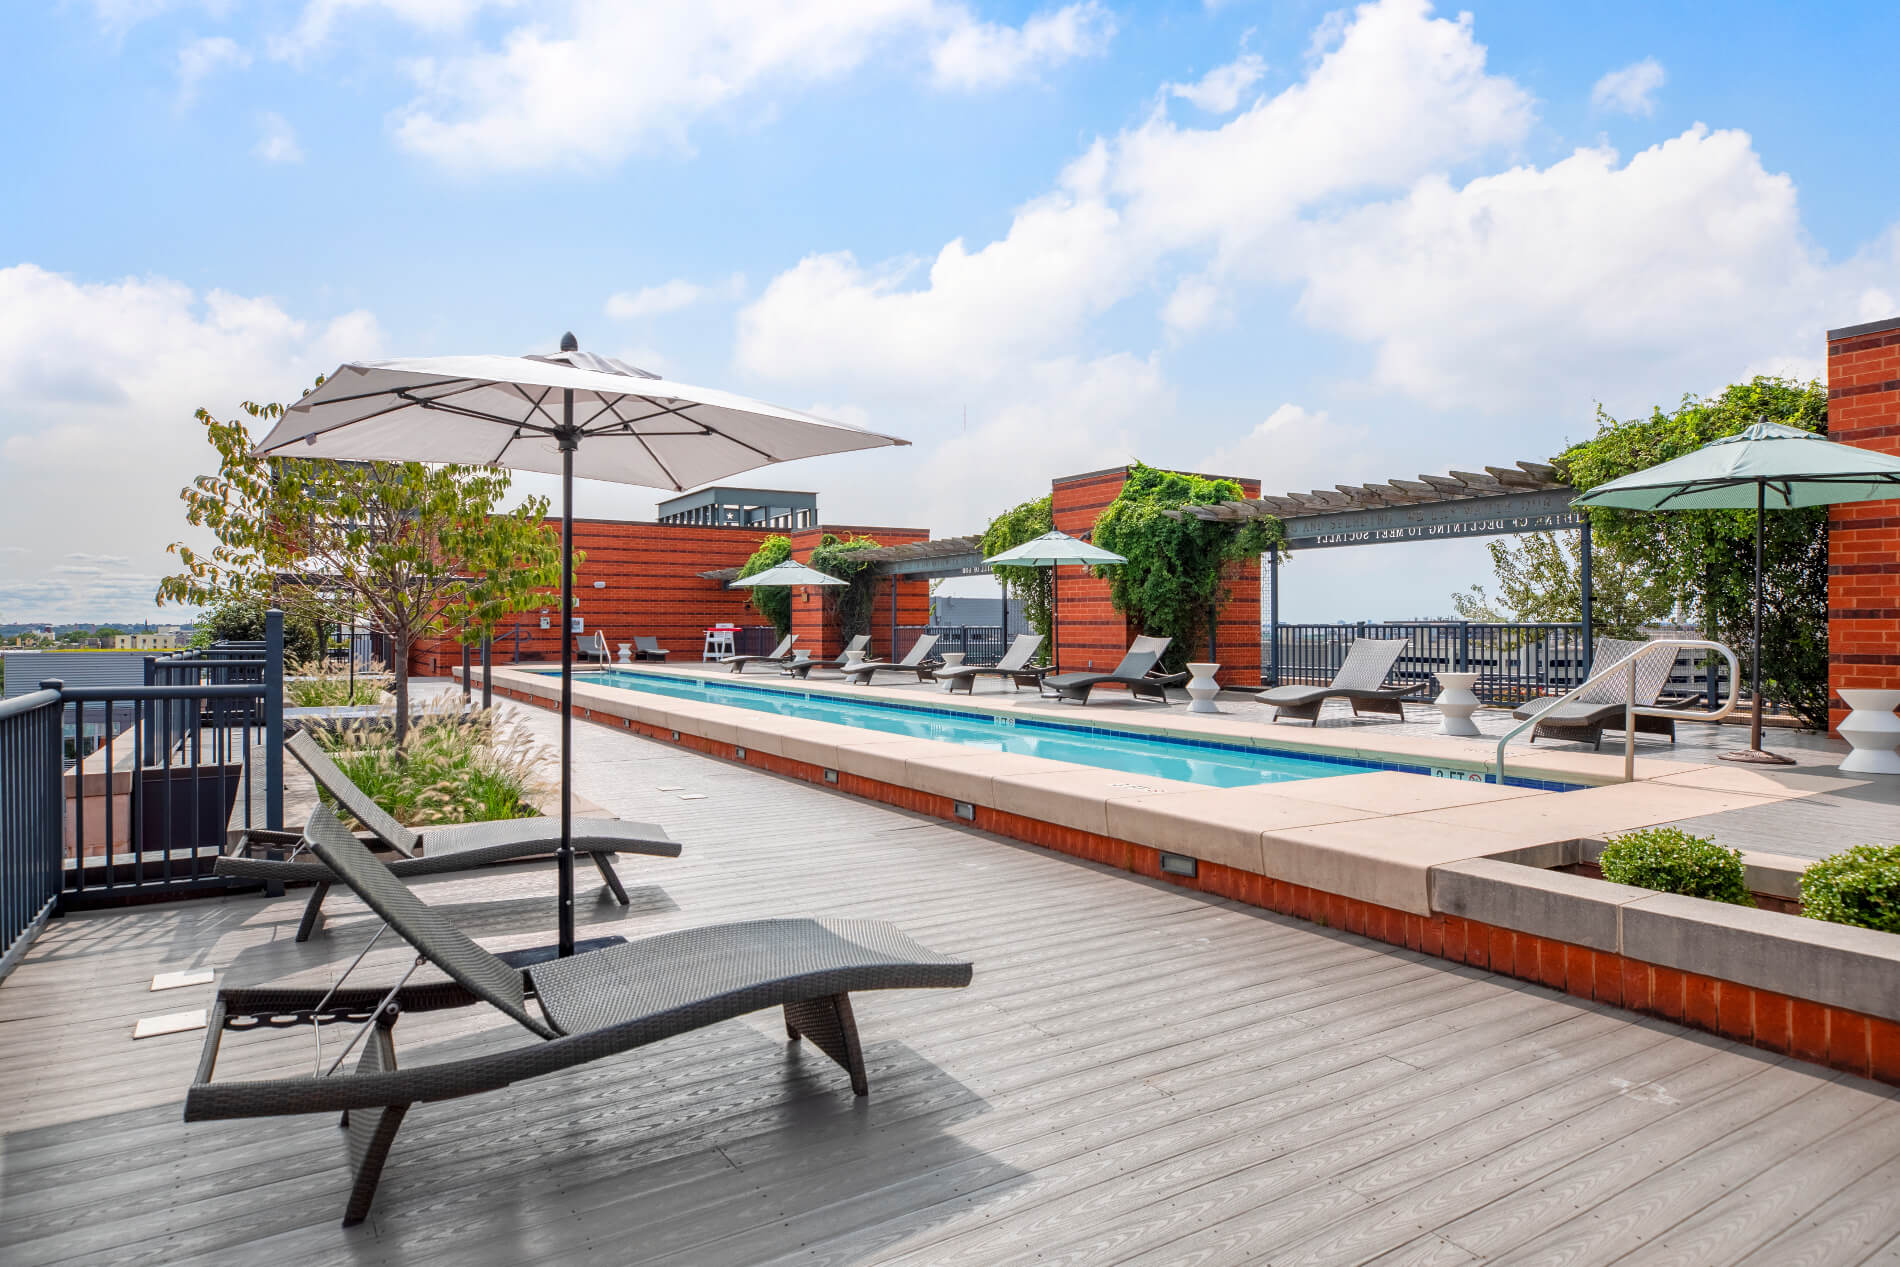 Rooftop pool with ample seating, umbrellas and growing vines